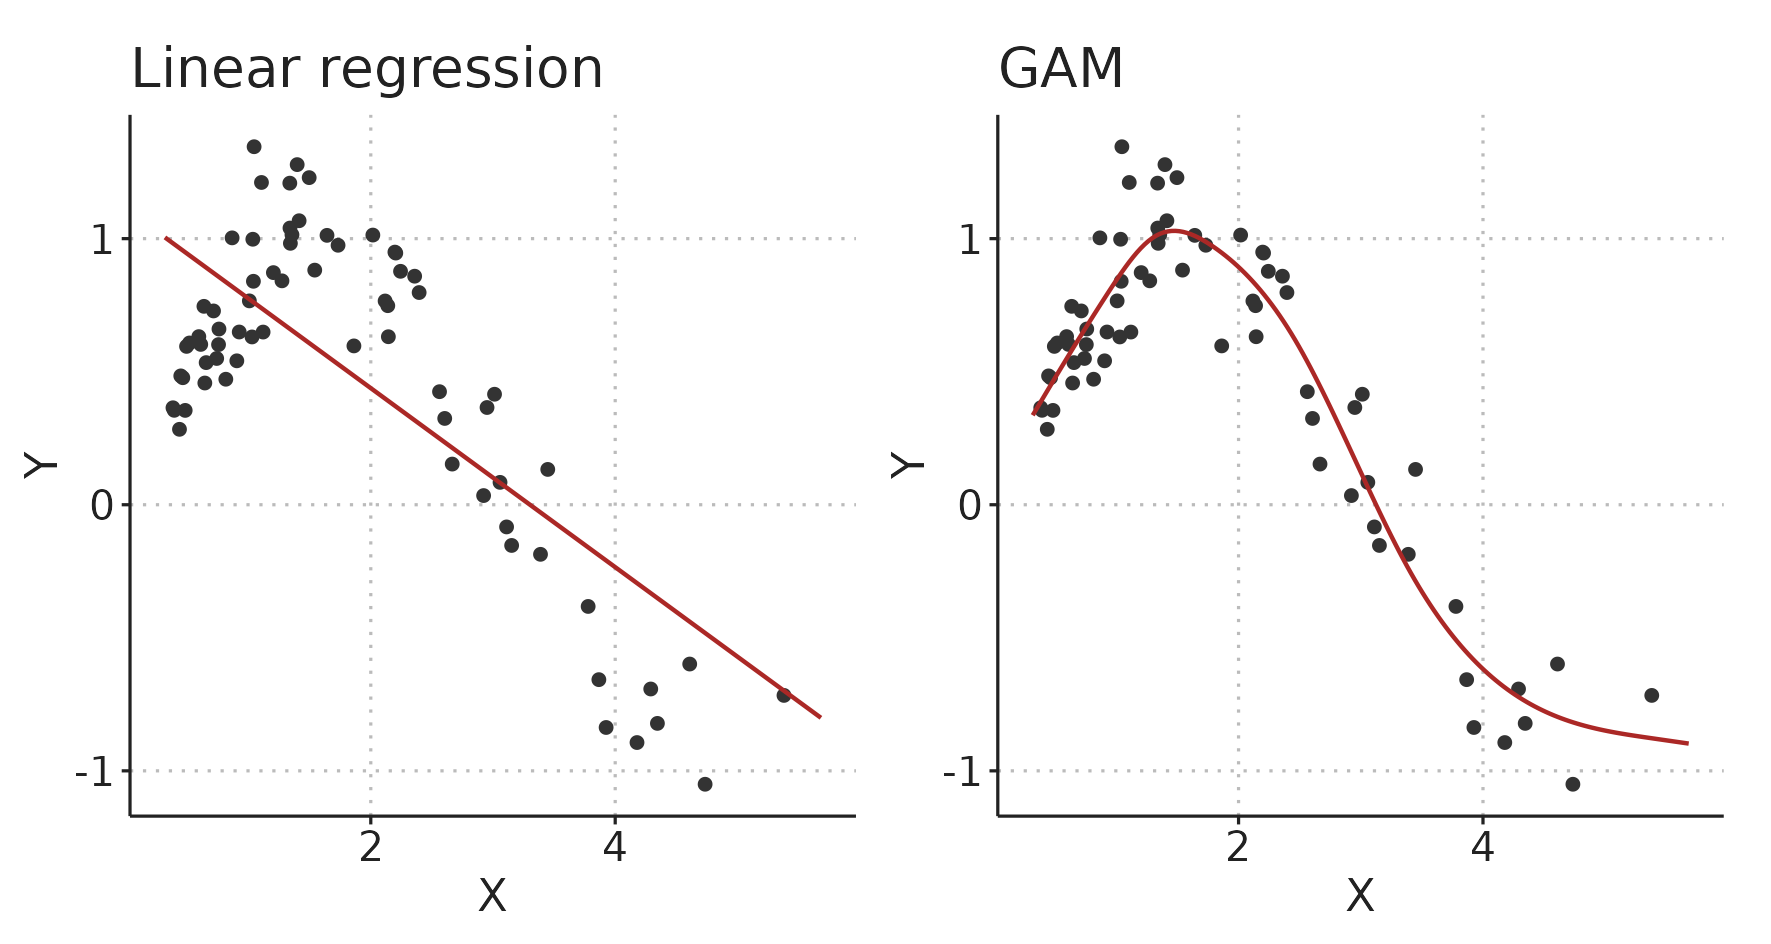 A linear model and a generalized additive model (GAM) fitting the same simulated data.